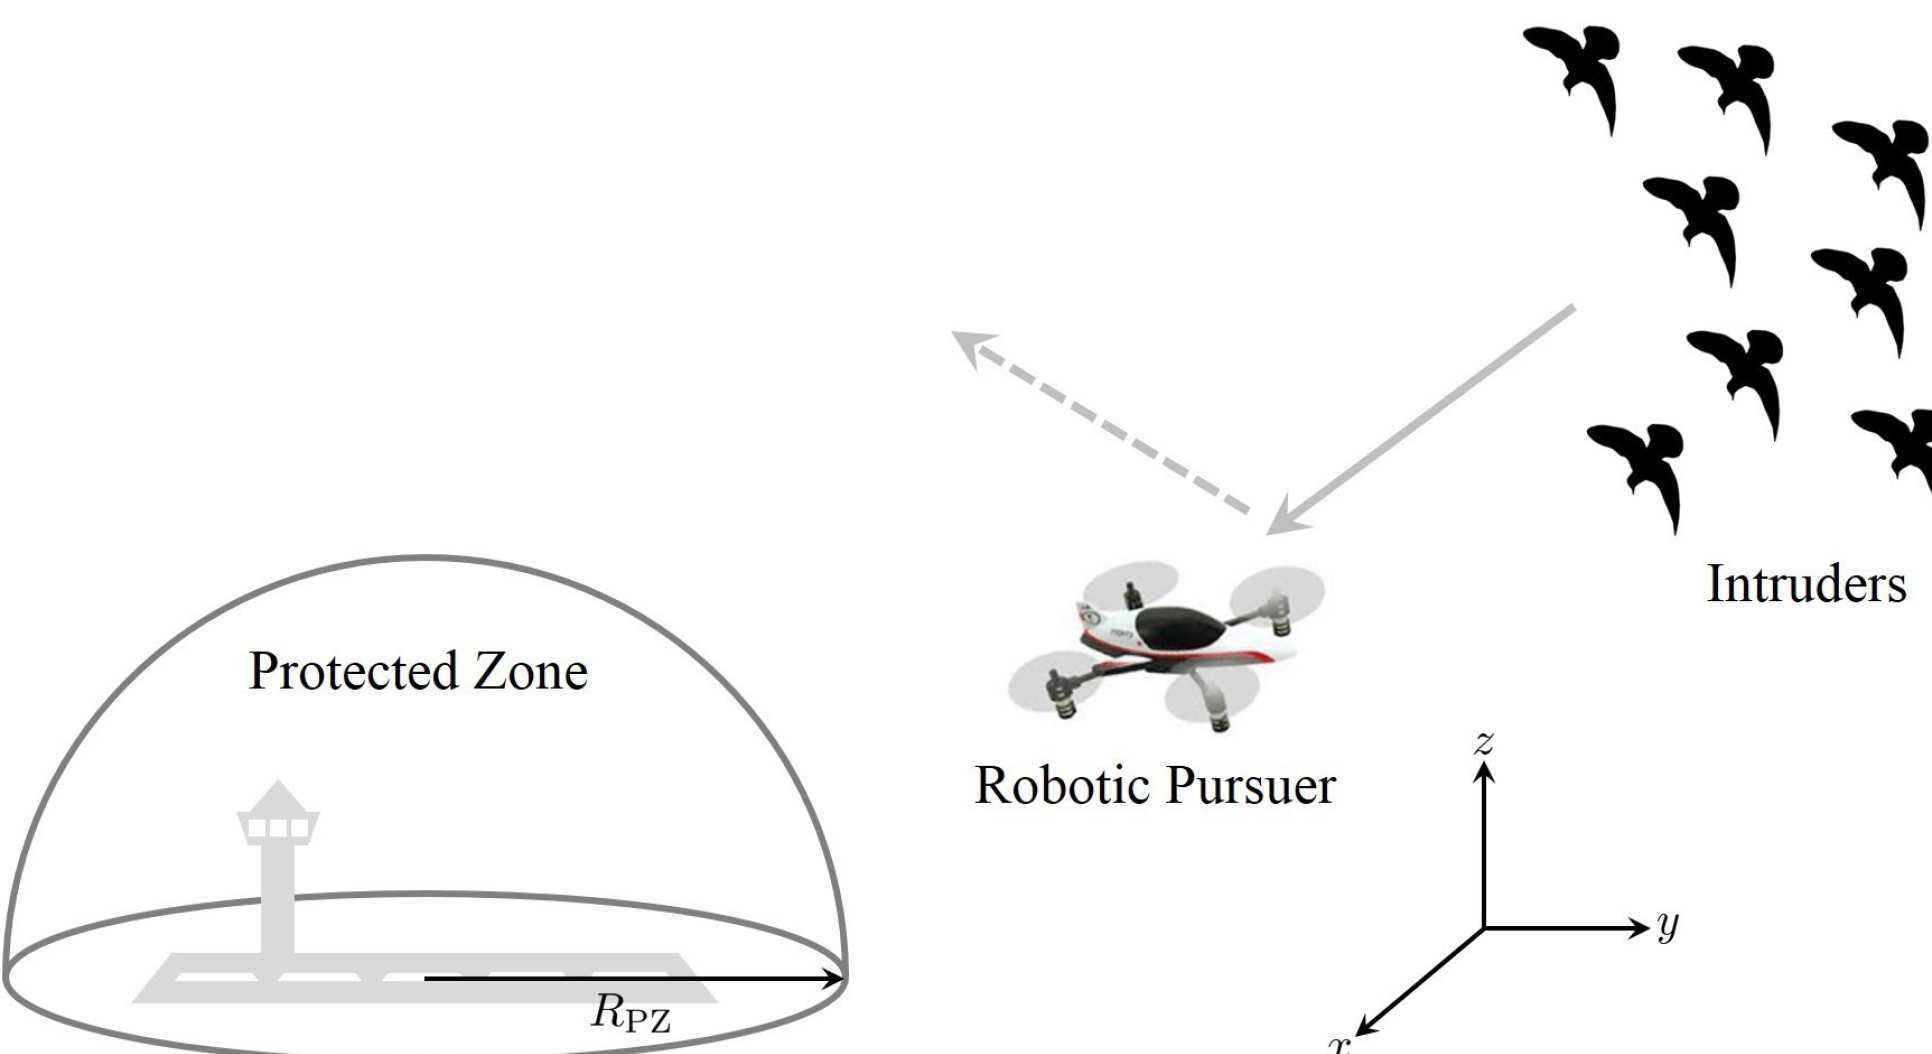 An illustration of how the bird herding drone works